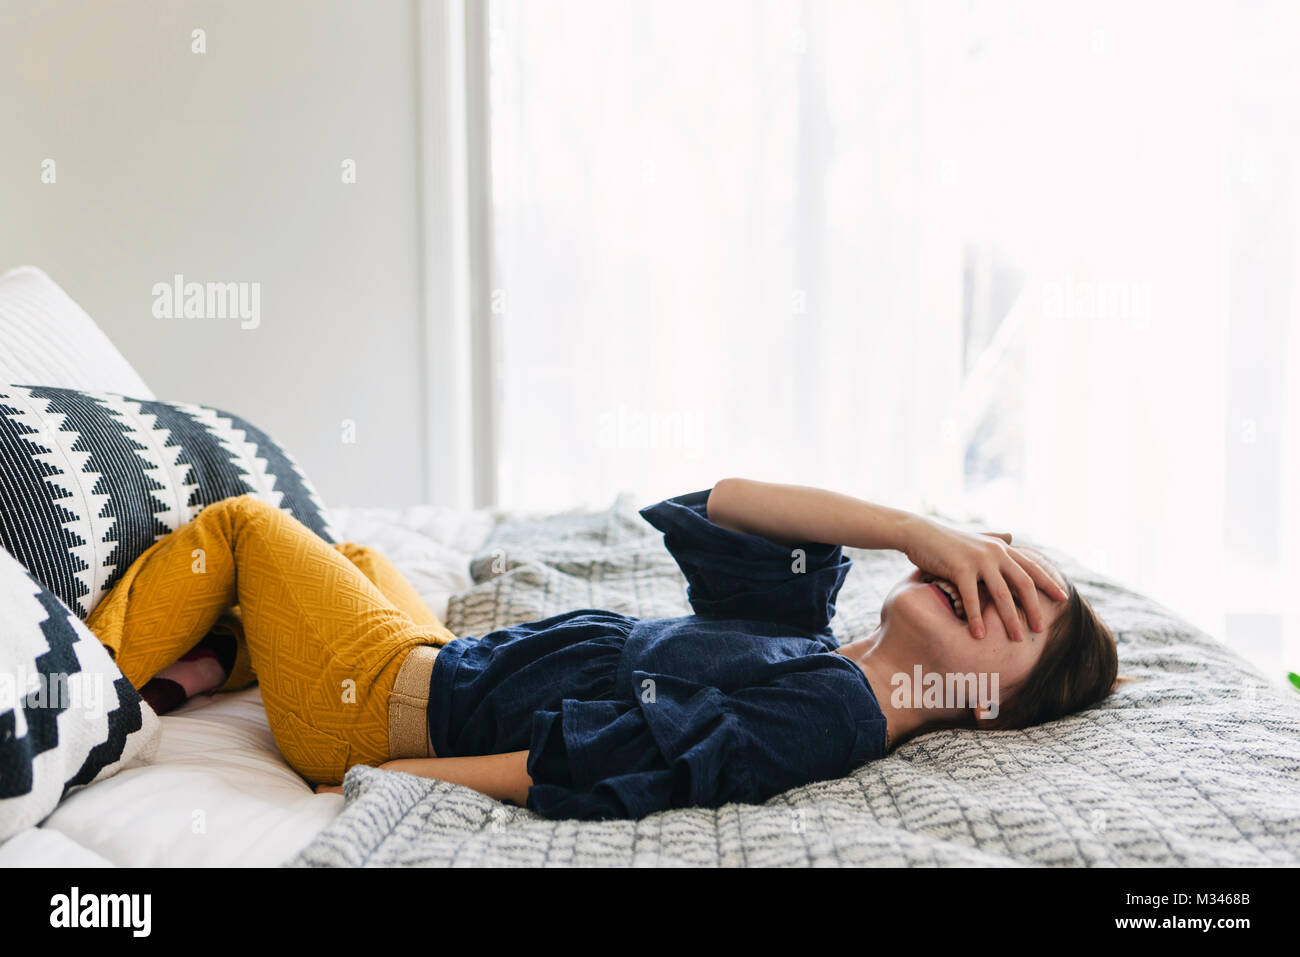 Girl lying on her bed laughing with her hand covering her eyes Stock Photo